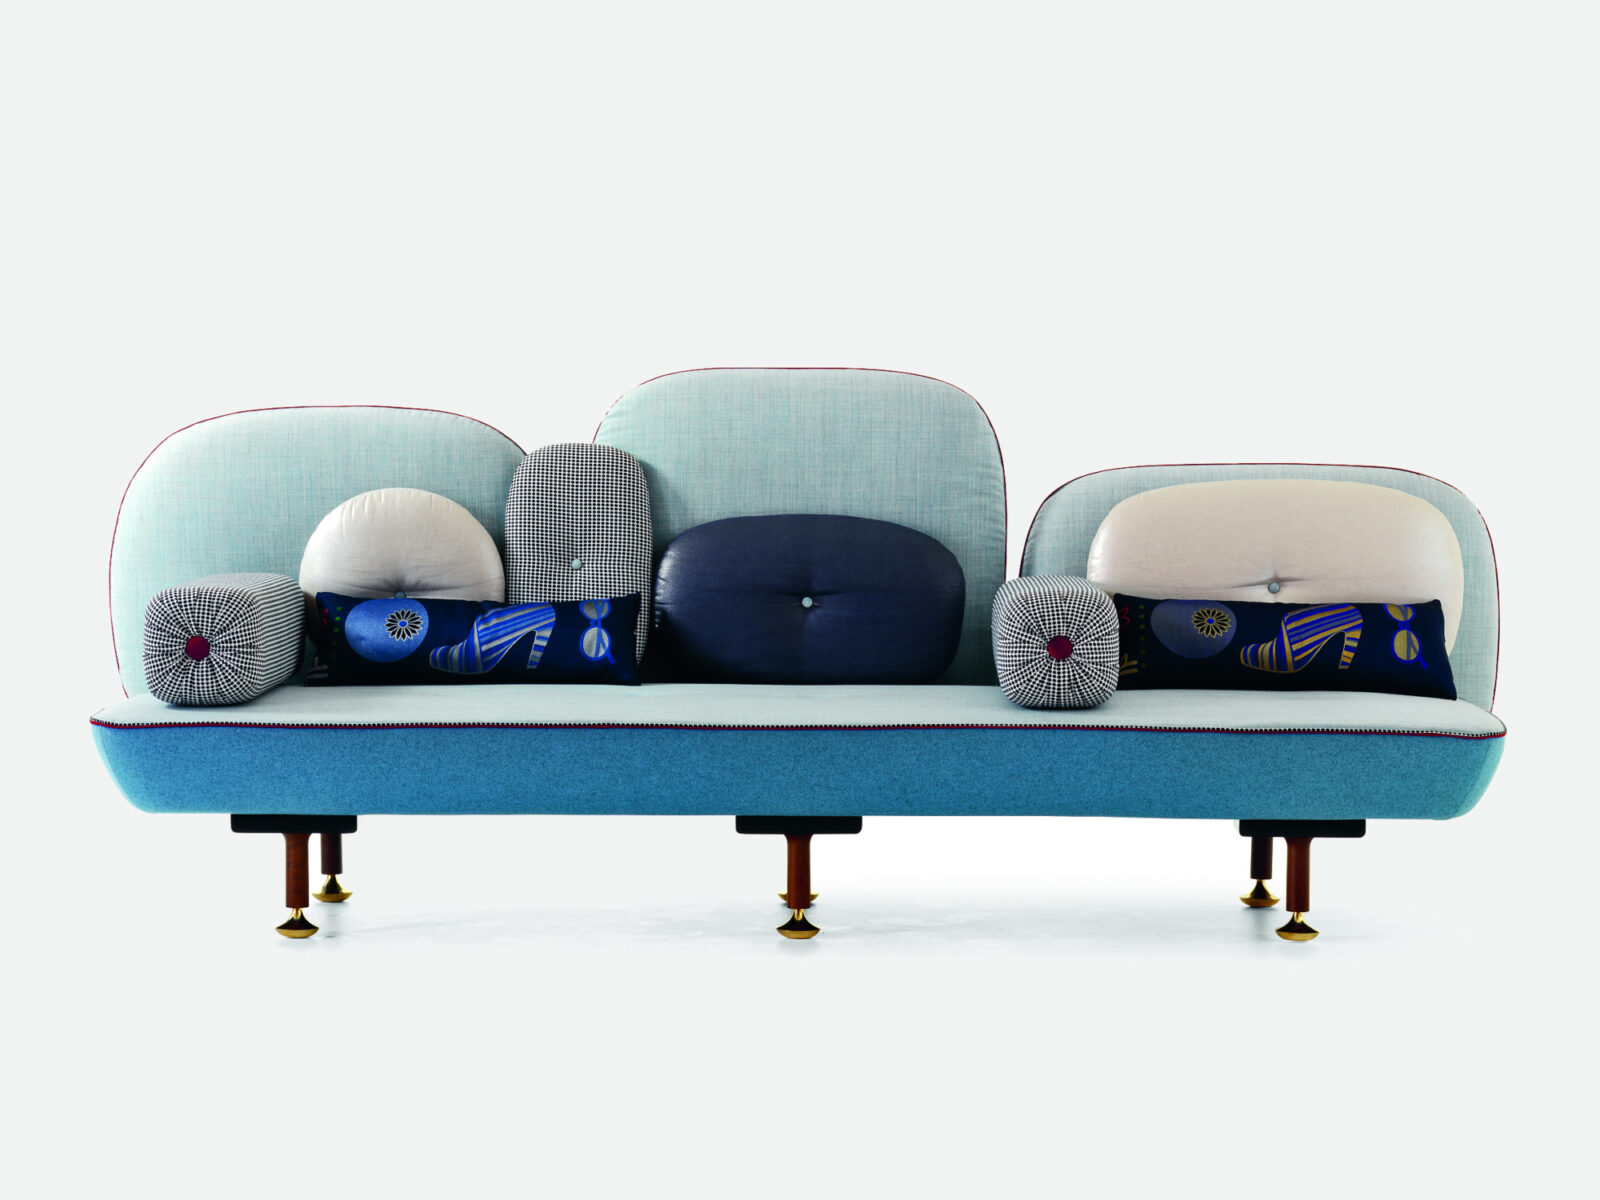 6 4 My Beautiful Backside sofa by Doshi Levien for Moroso 2018 Grey Background